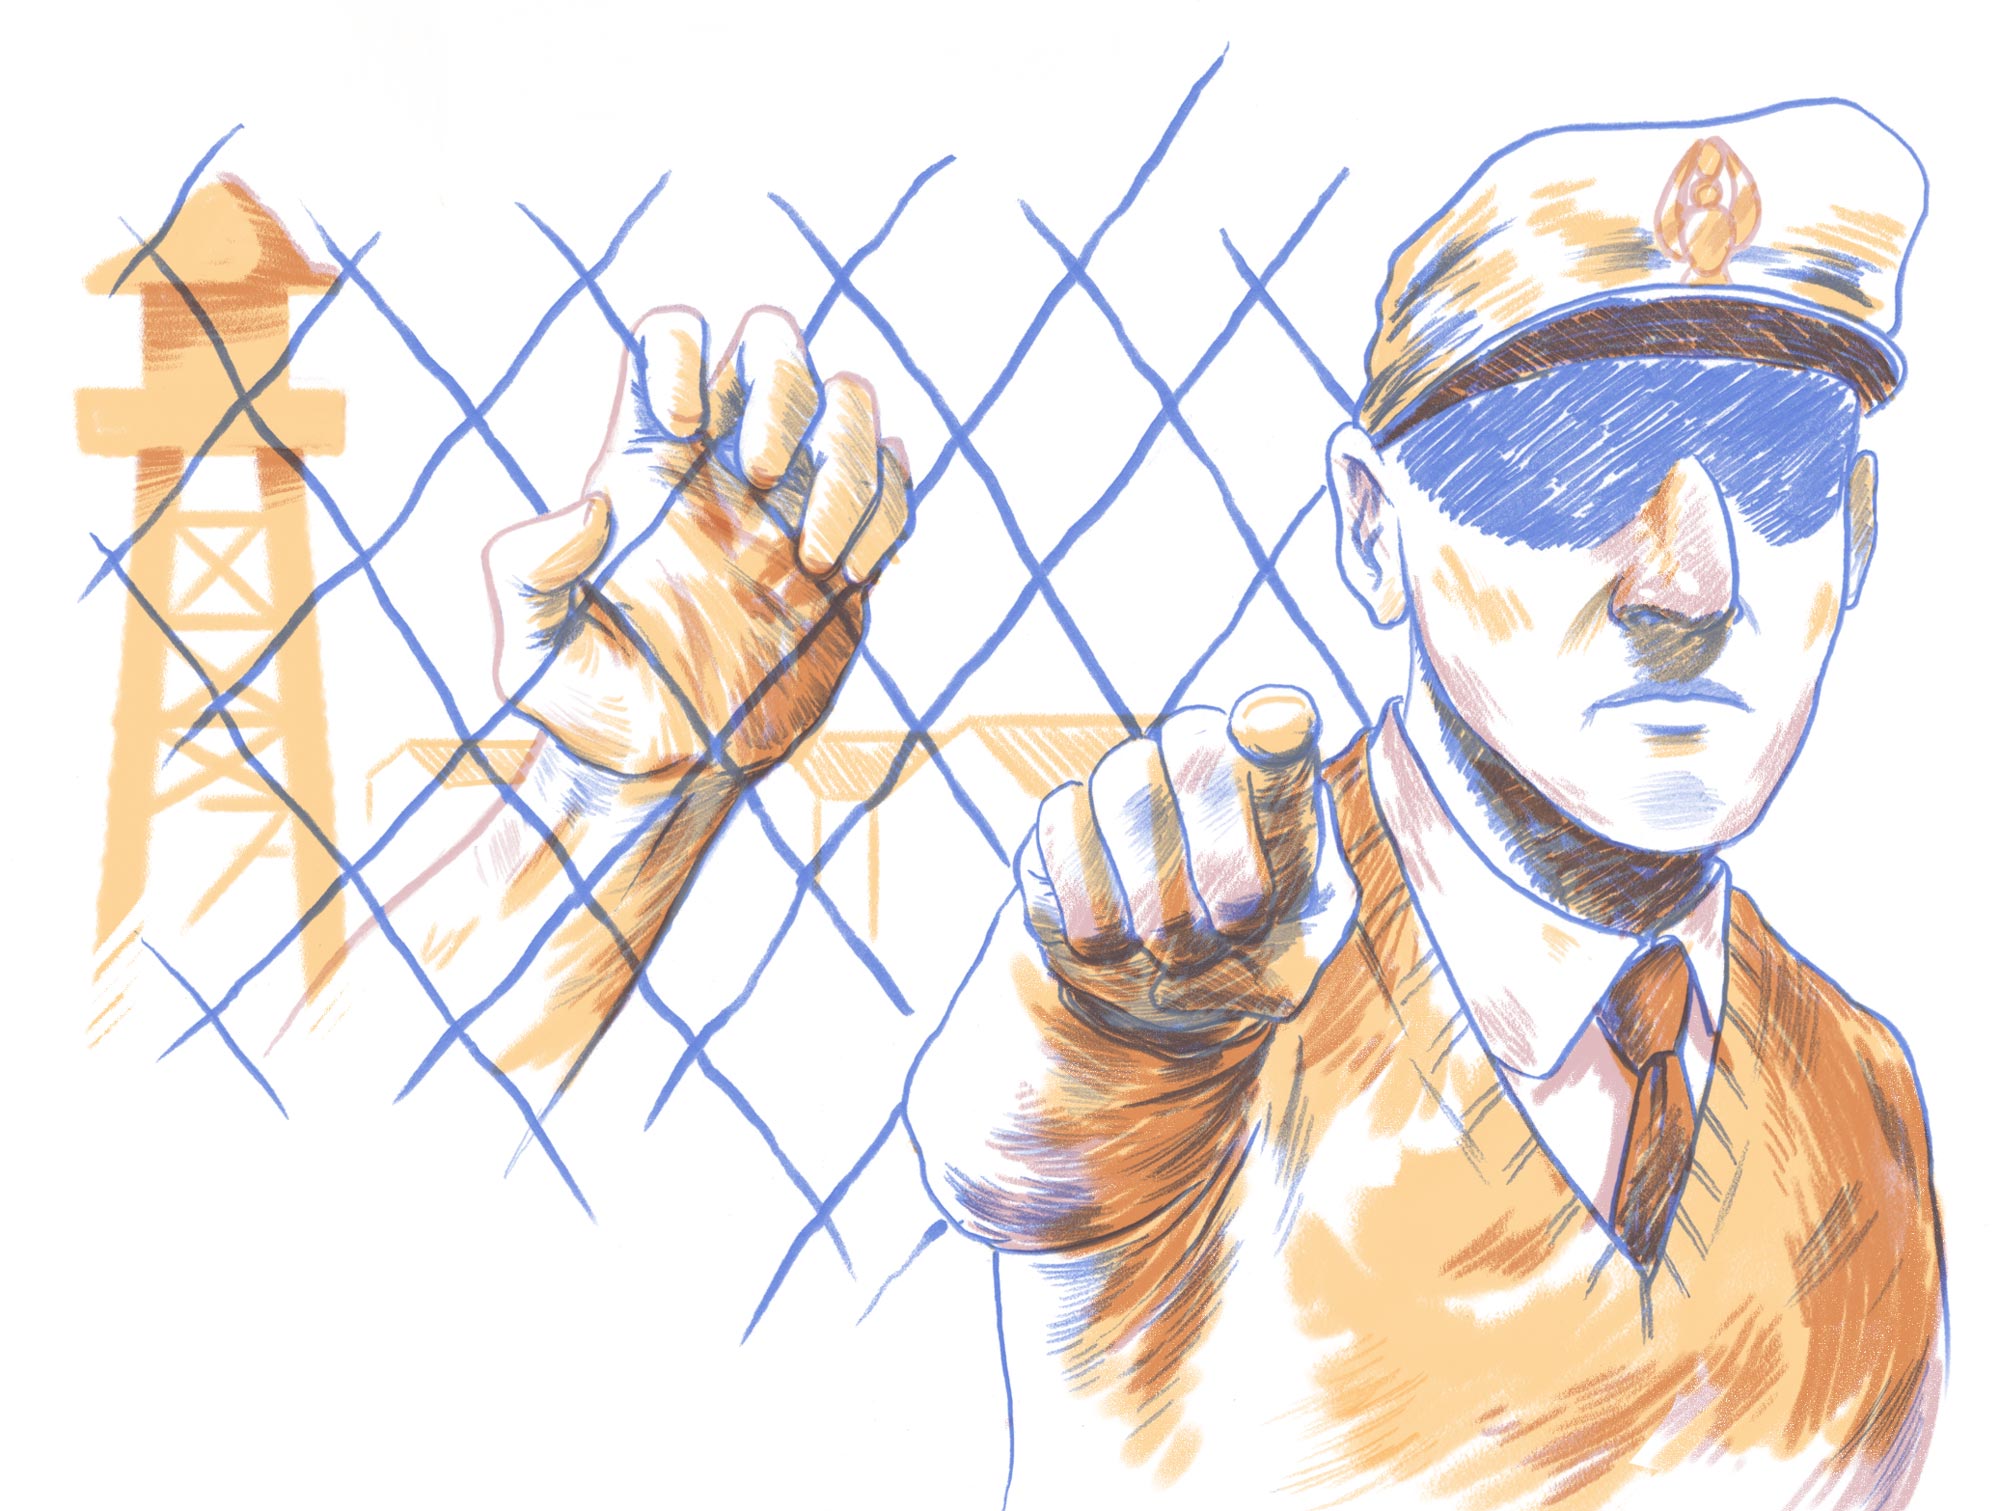 Illustration of a hand grasping a chain link fence and a guard pointing menacingly